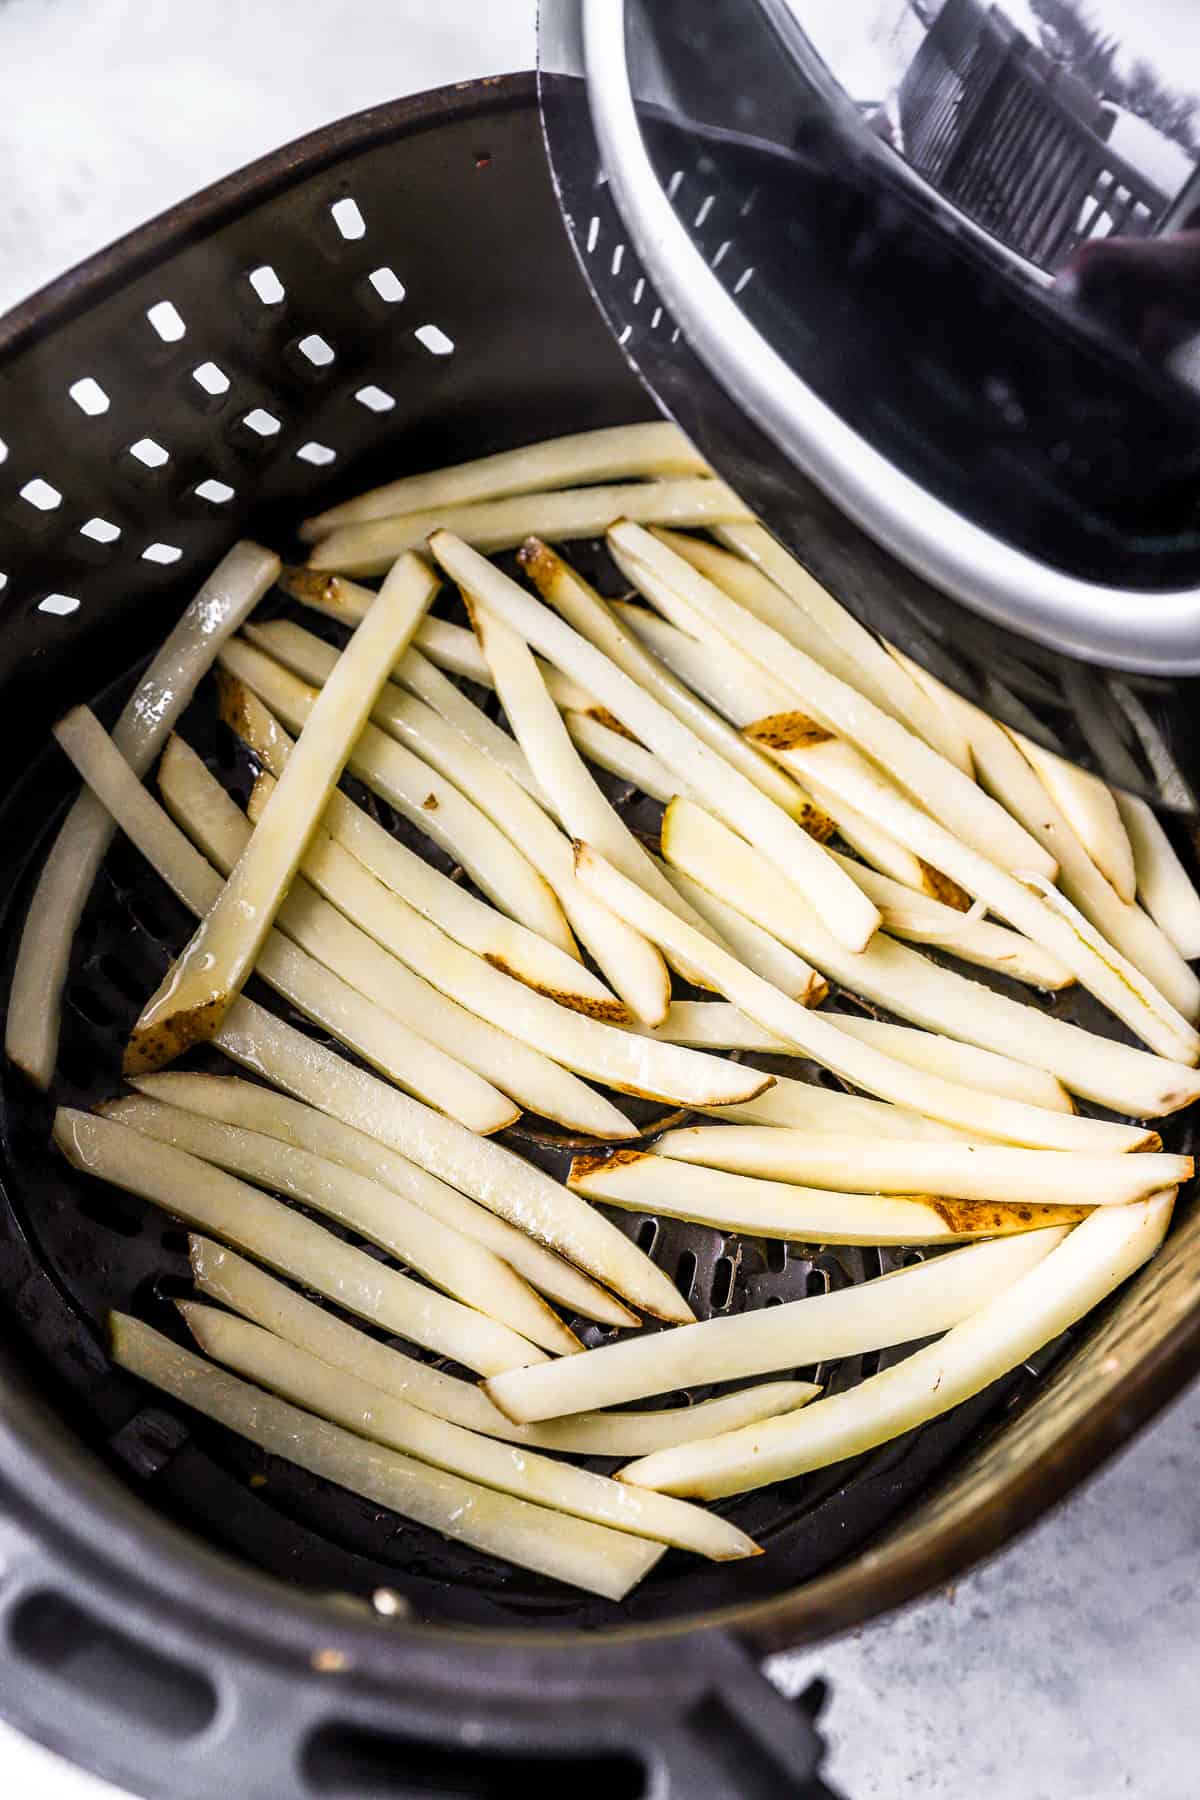 https://www.thecookierookie.com/wp-content/uploads/2023/02/how-to-air-fryer-french-fries-recipe-4.jpg